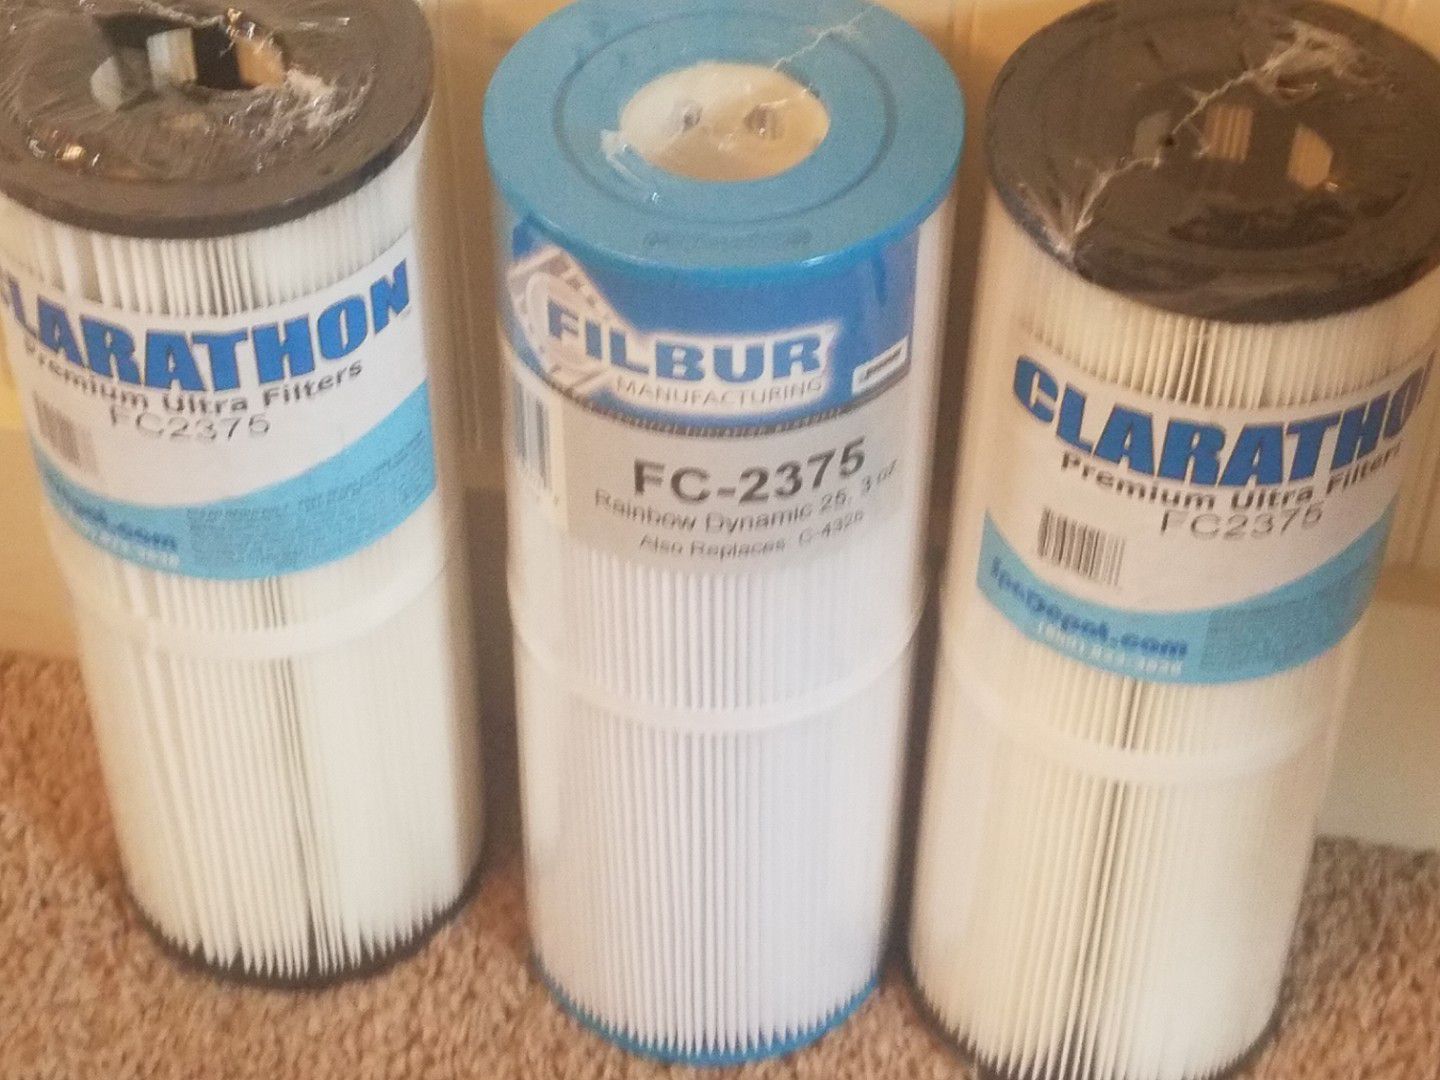 Hot tub filters